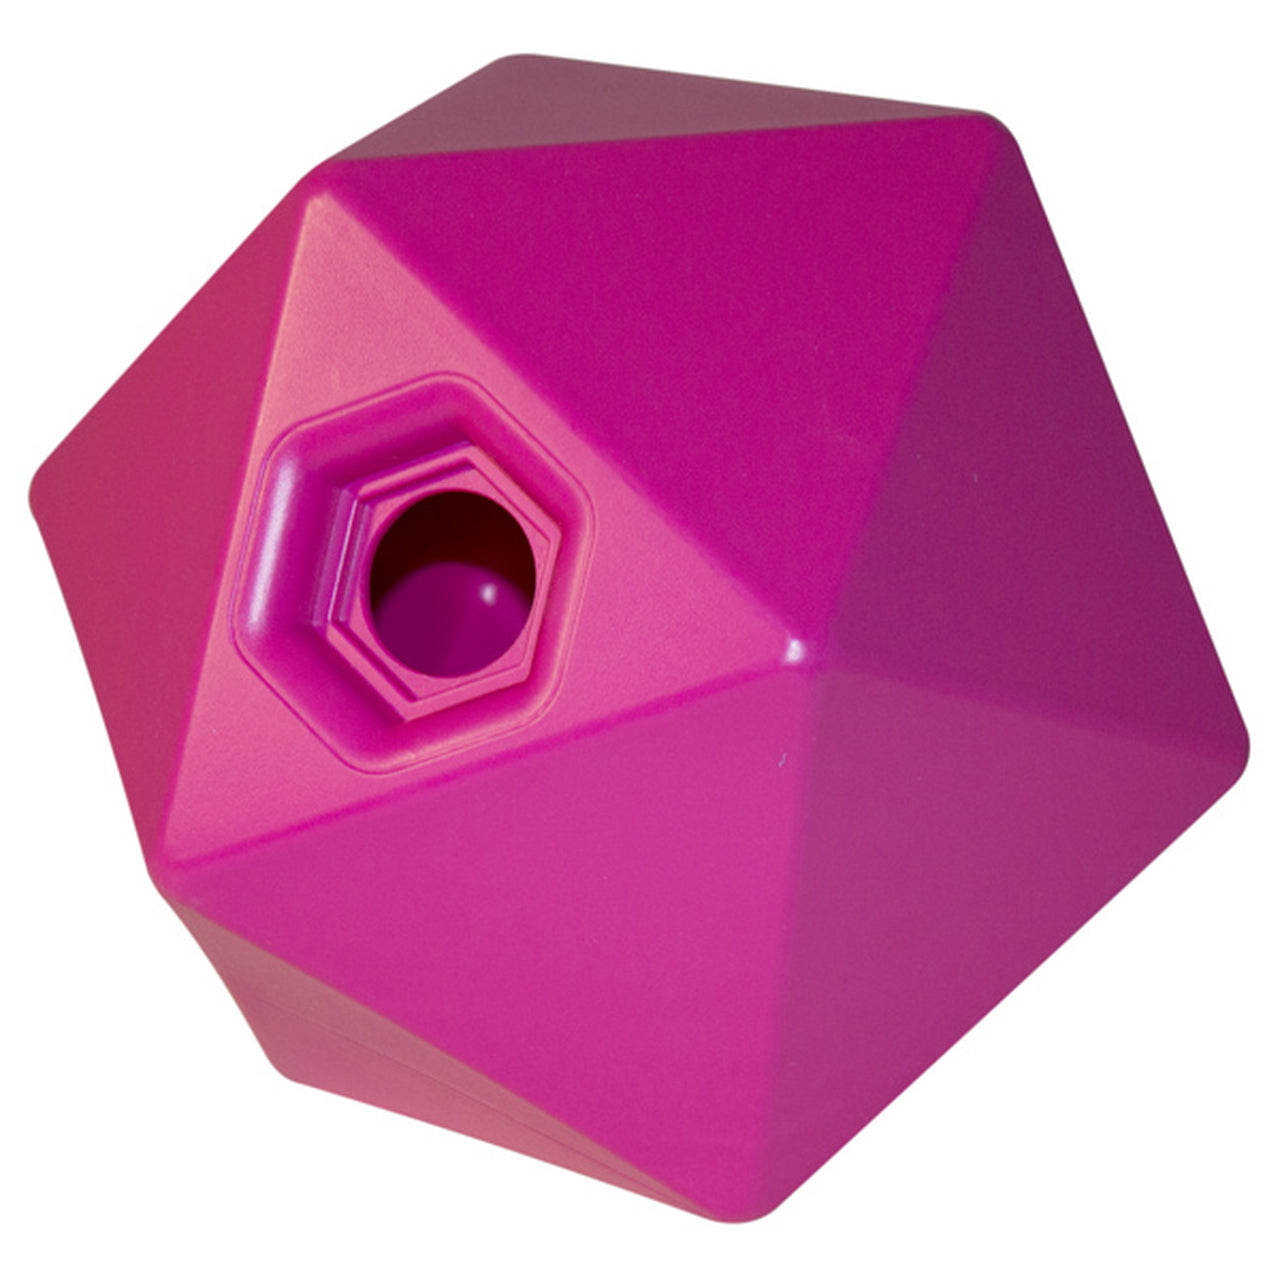 Pink treat ball with numerous flat sides and a small treat opening.